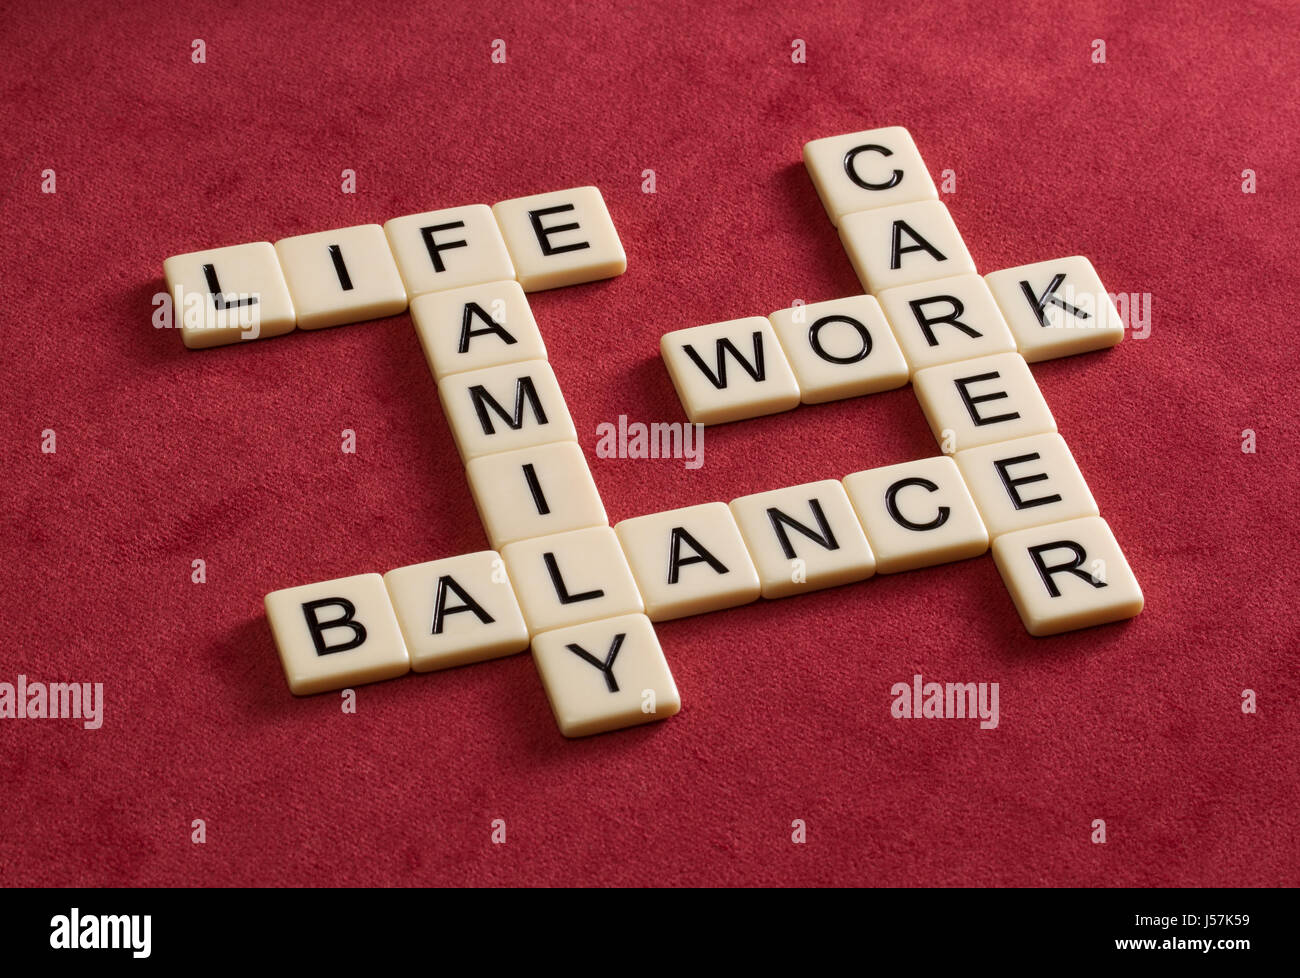 Crossword puzzle with words Life, Work and Balance. Life Management concept. Ivory tiles with capital letters on red velure. Stock Photo